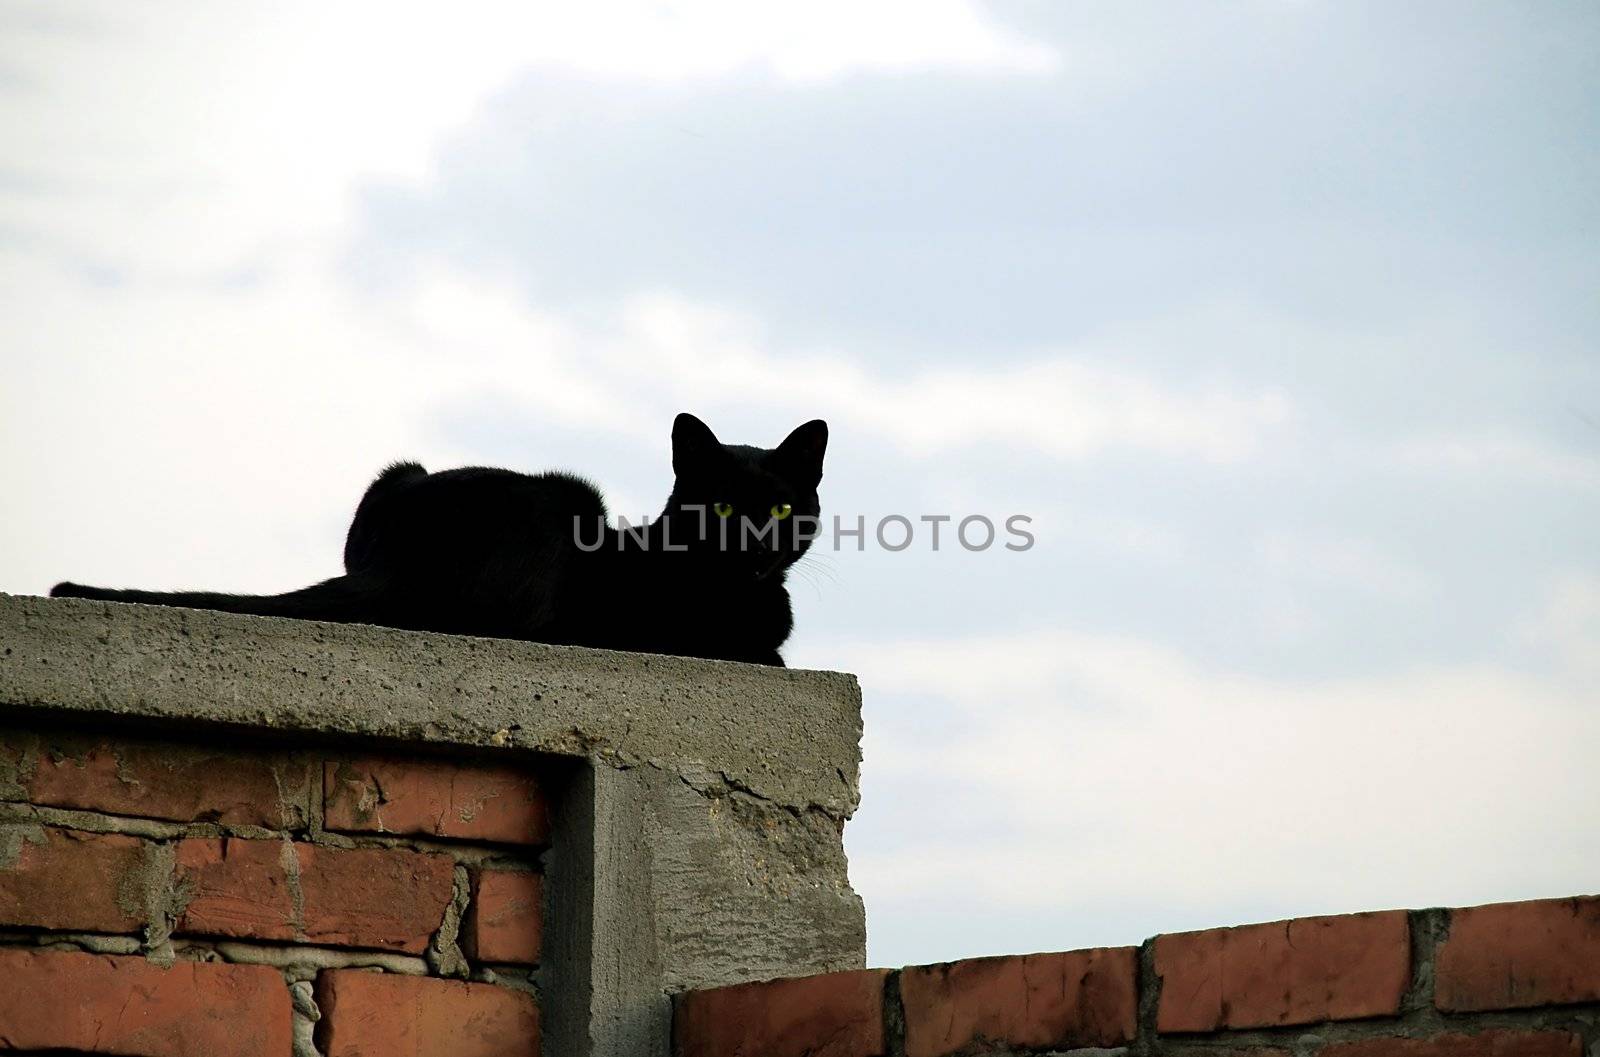 black cat with green eyes over brick fence relaxing